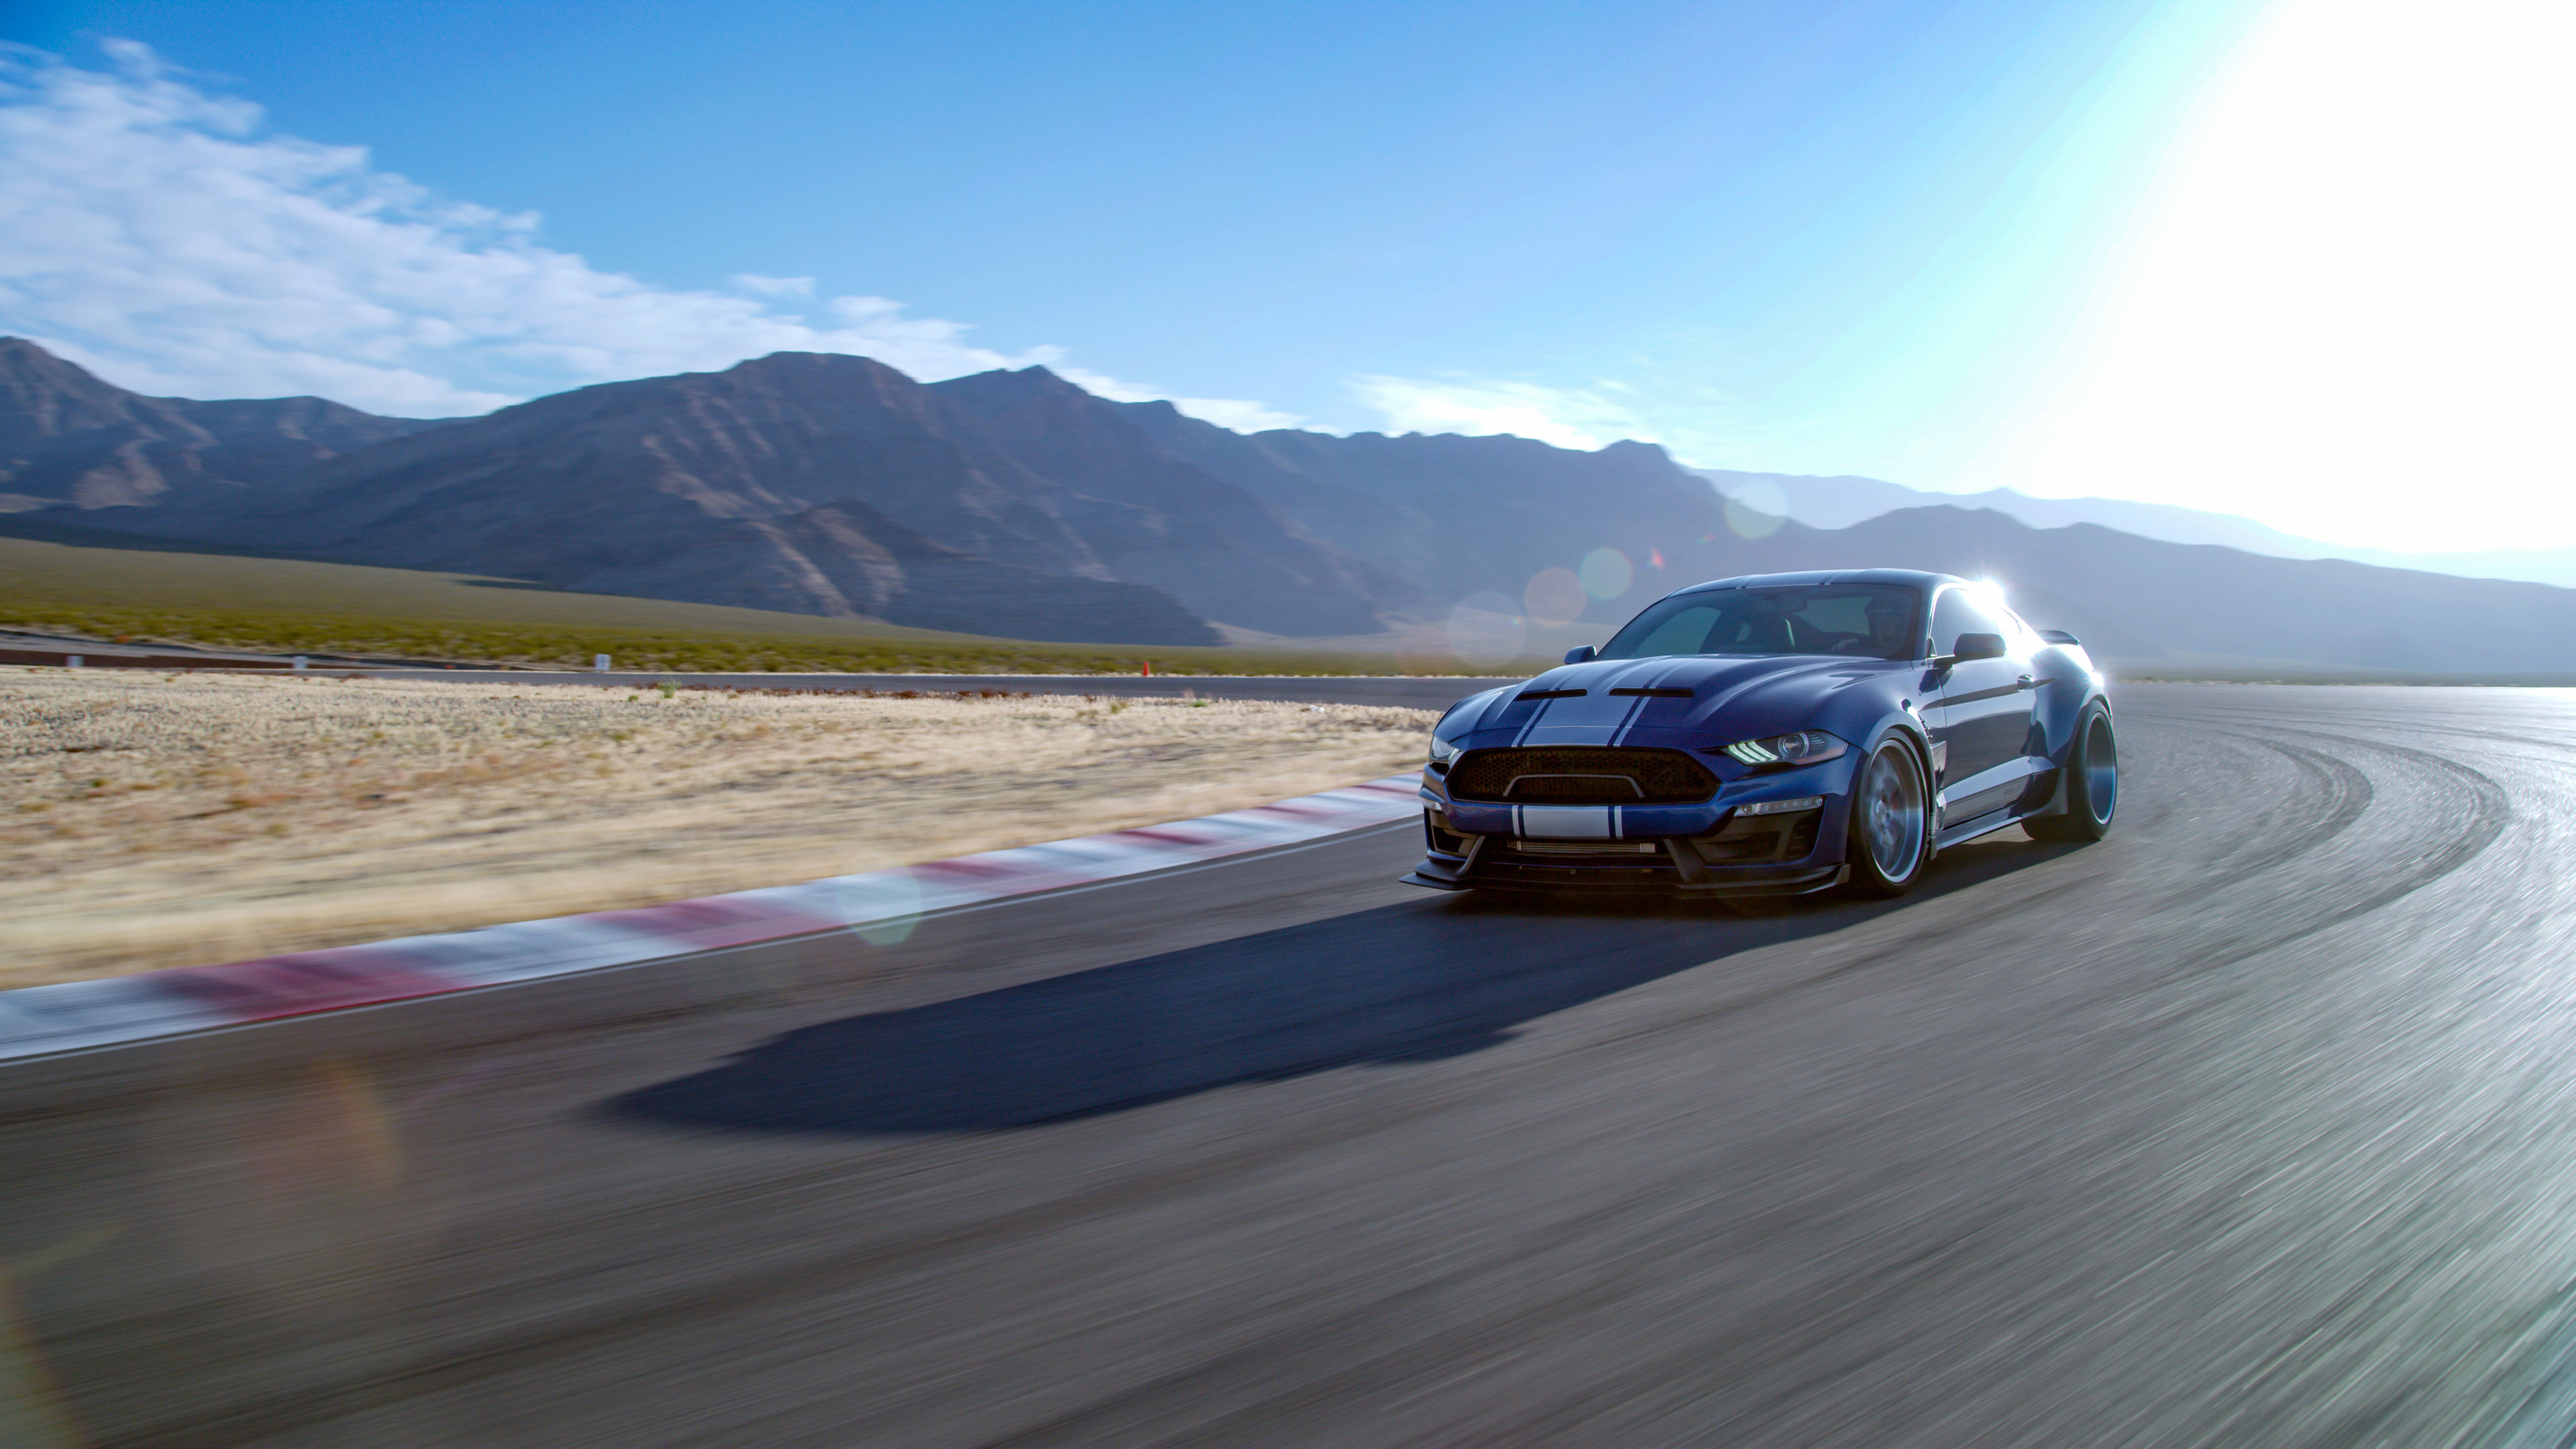 Ford Mustang Wallpapers  HD Wallpapers  ID 29945